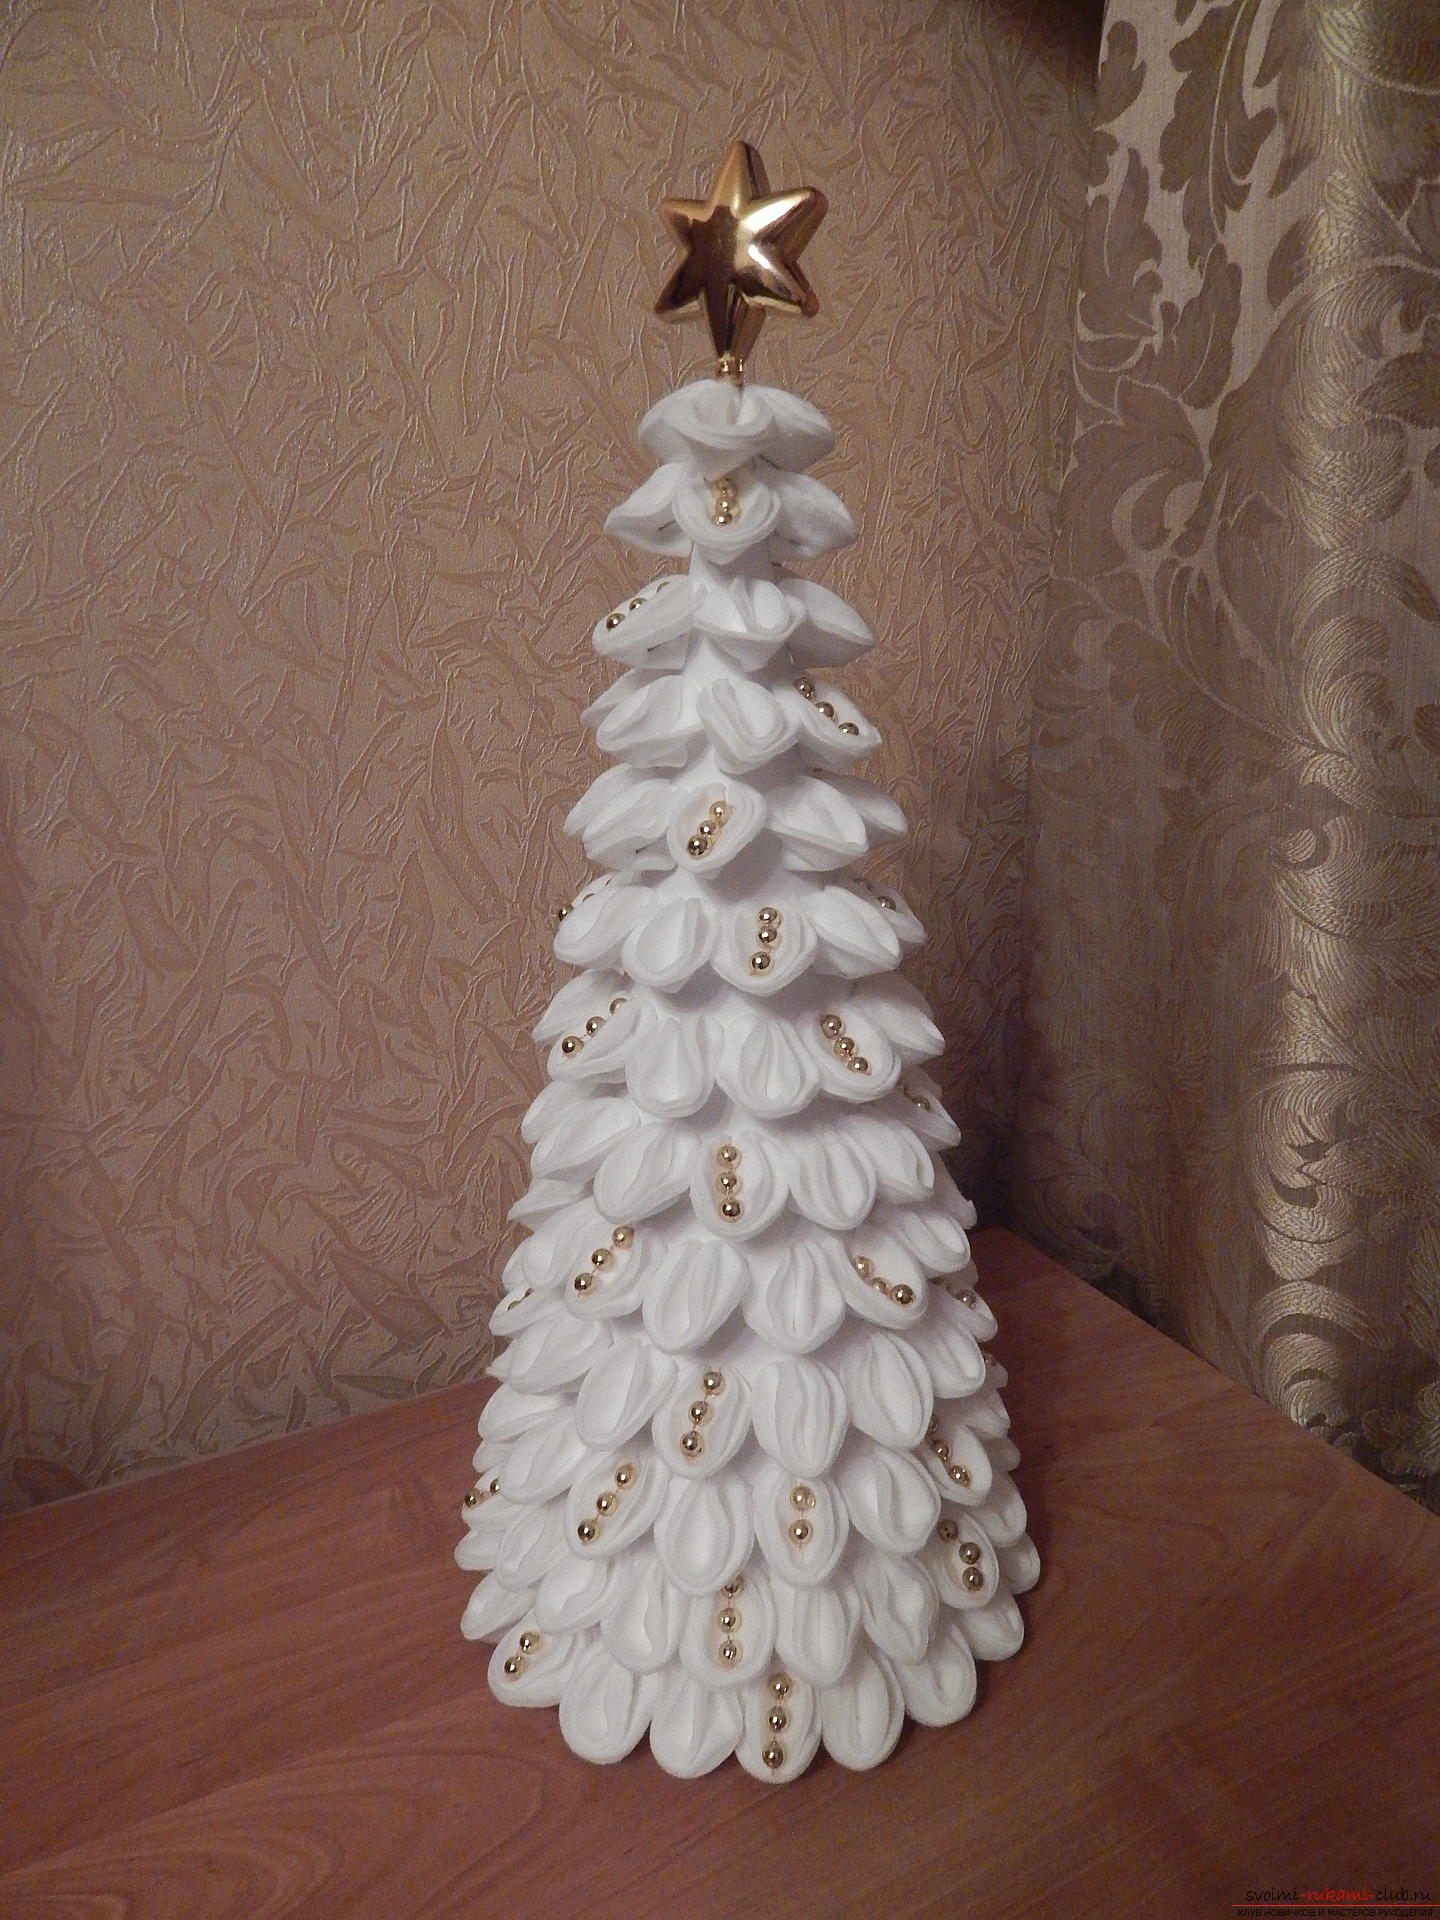 From wadded disks turns out a beautiful snow-white tree, which is very soft to the touch. The Christmas tree, created by own hands, can decorate your house or workplace.